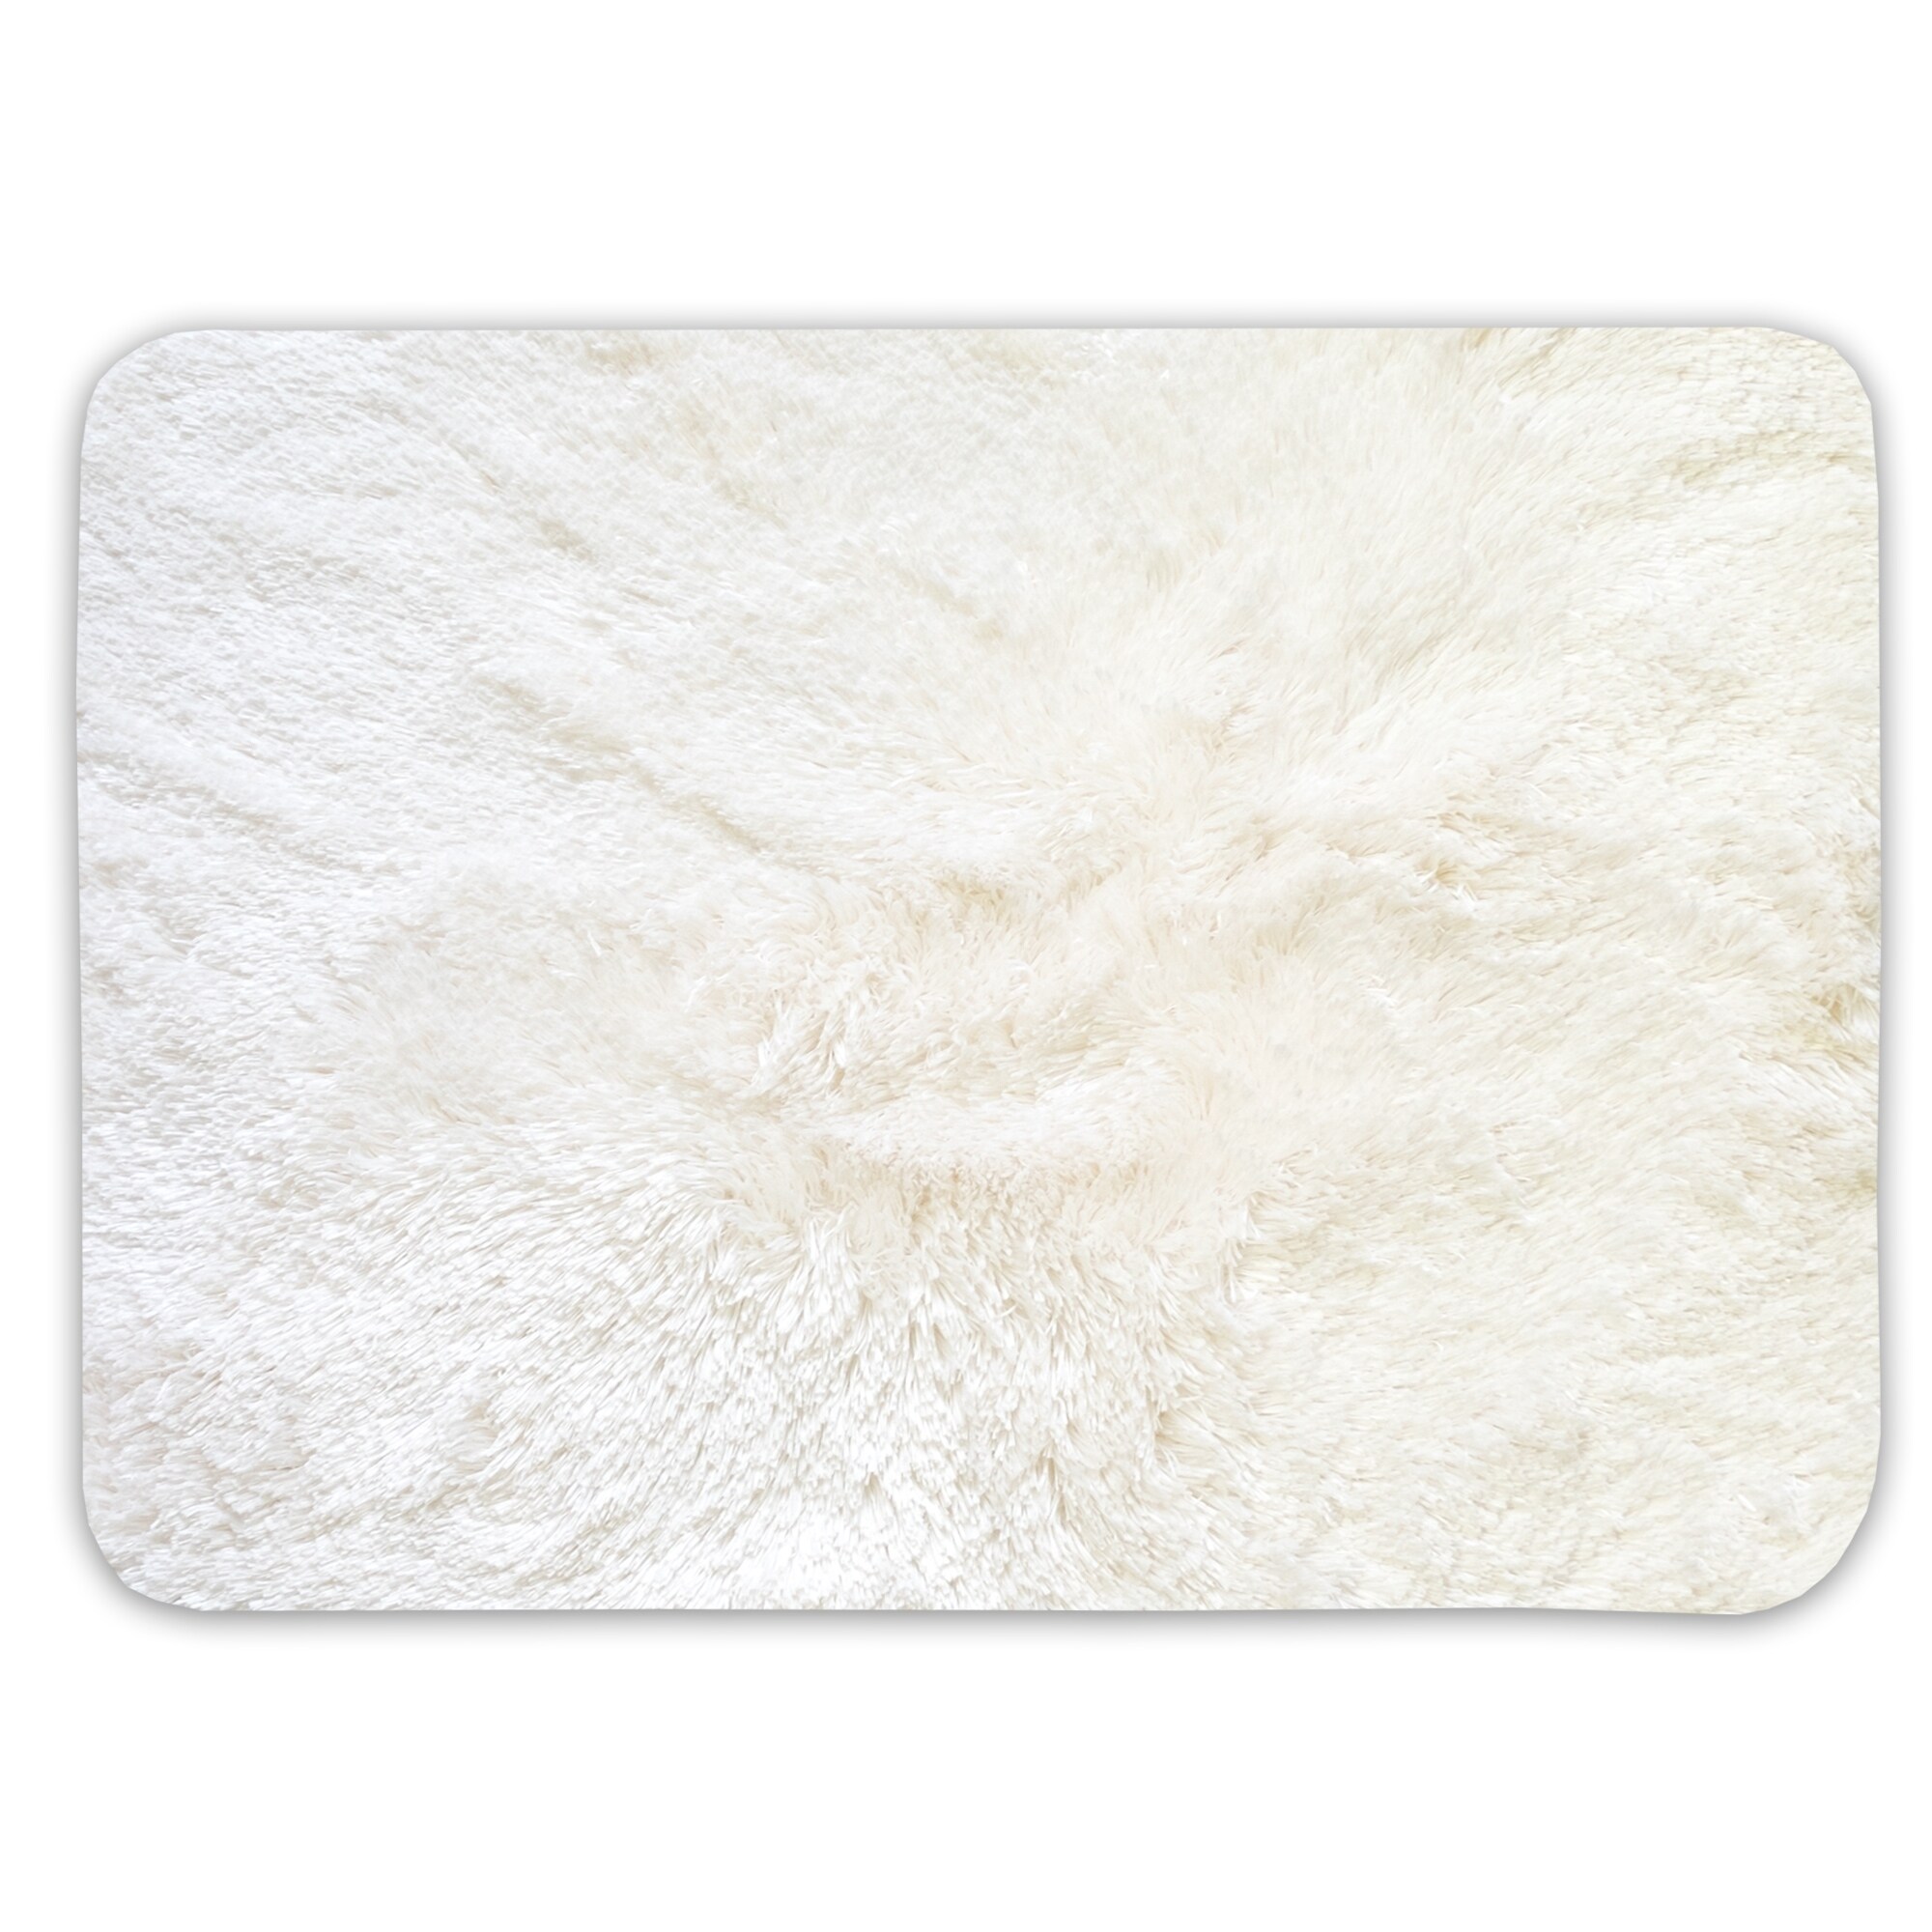 https://ak1.ostkcdn.com/images/products/18535208/Sweet-Home-Collection-Faux-Fur-Bath-Rug-Available-in-10-colors-and-3-sizes-f4bfa814-cc02-4c7b-8a85-fffd5c7753c4.jpg